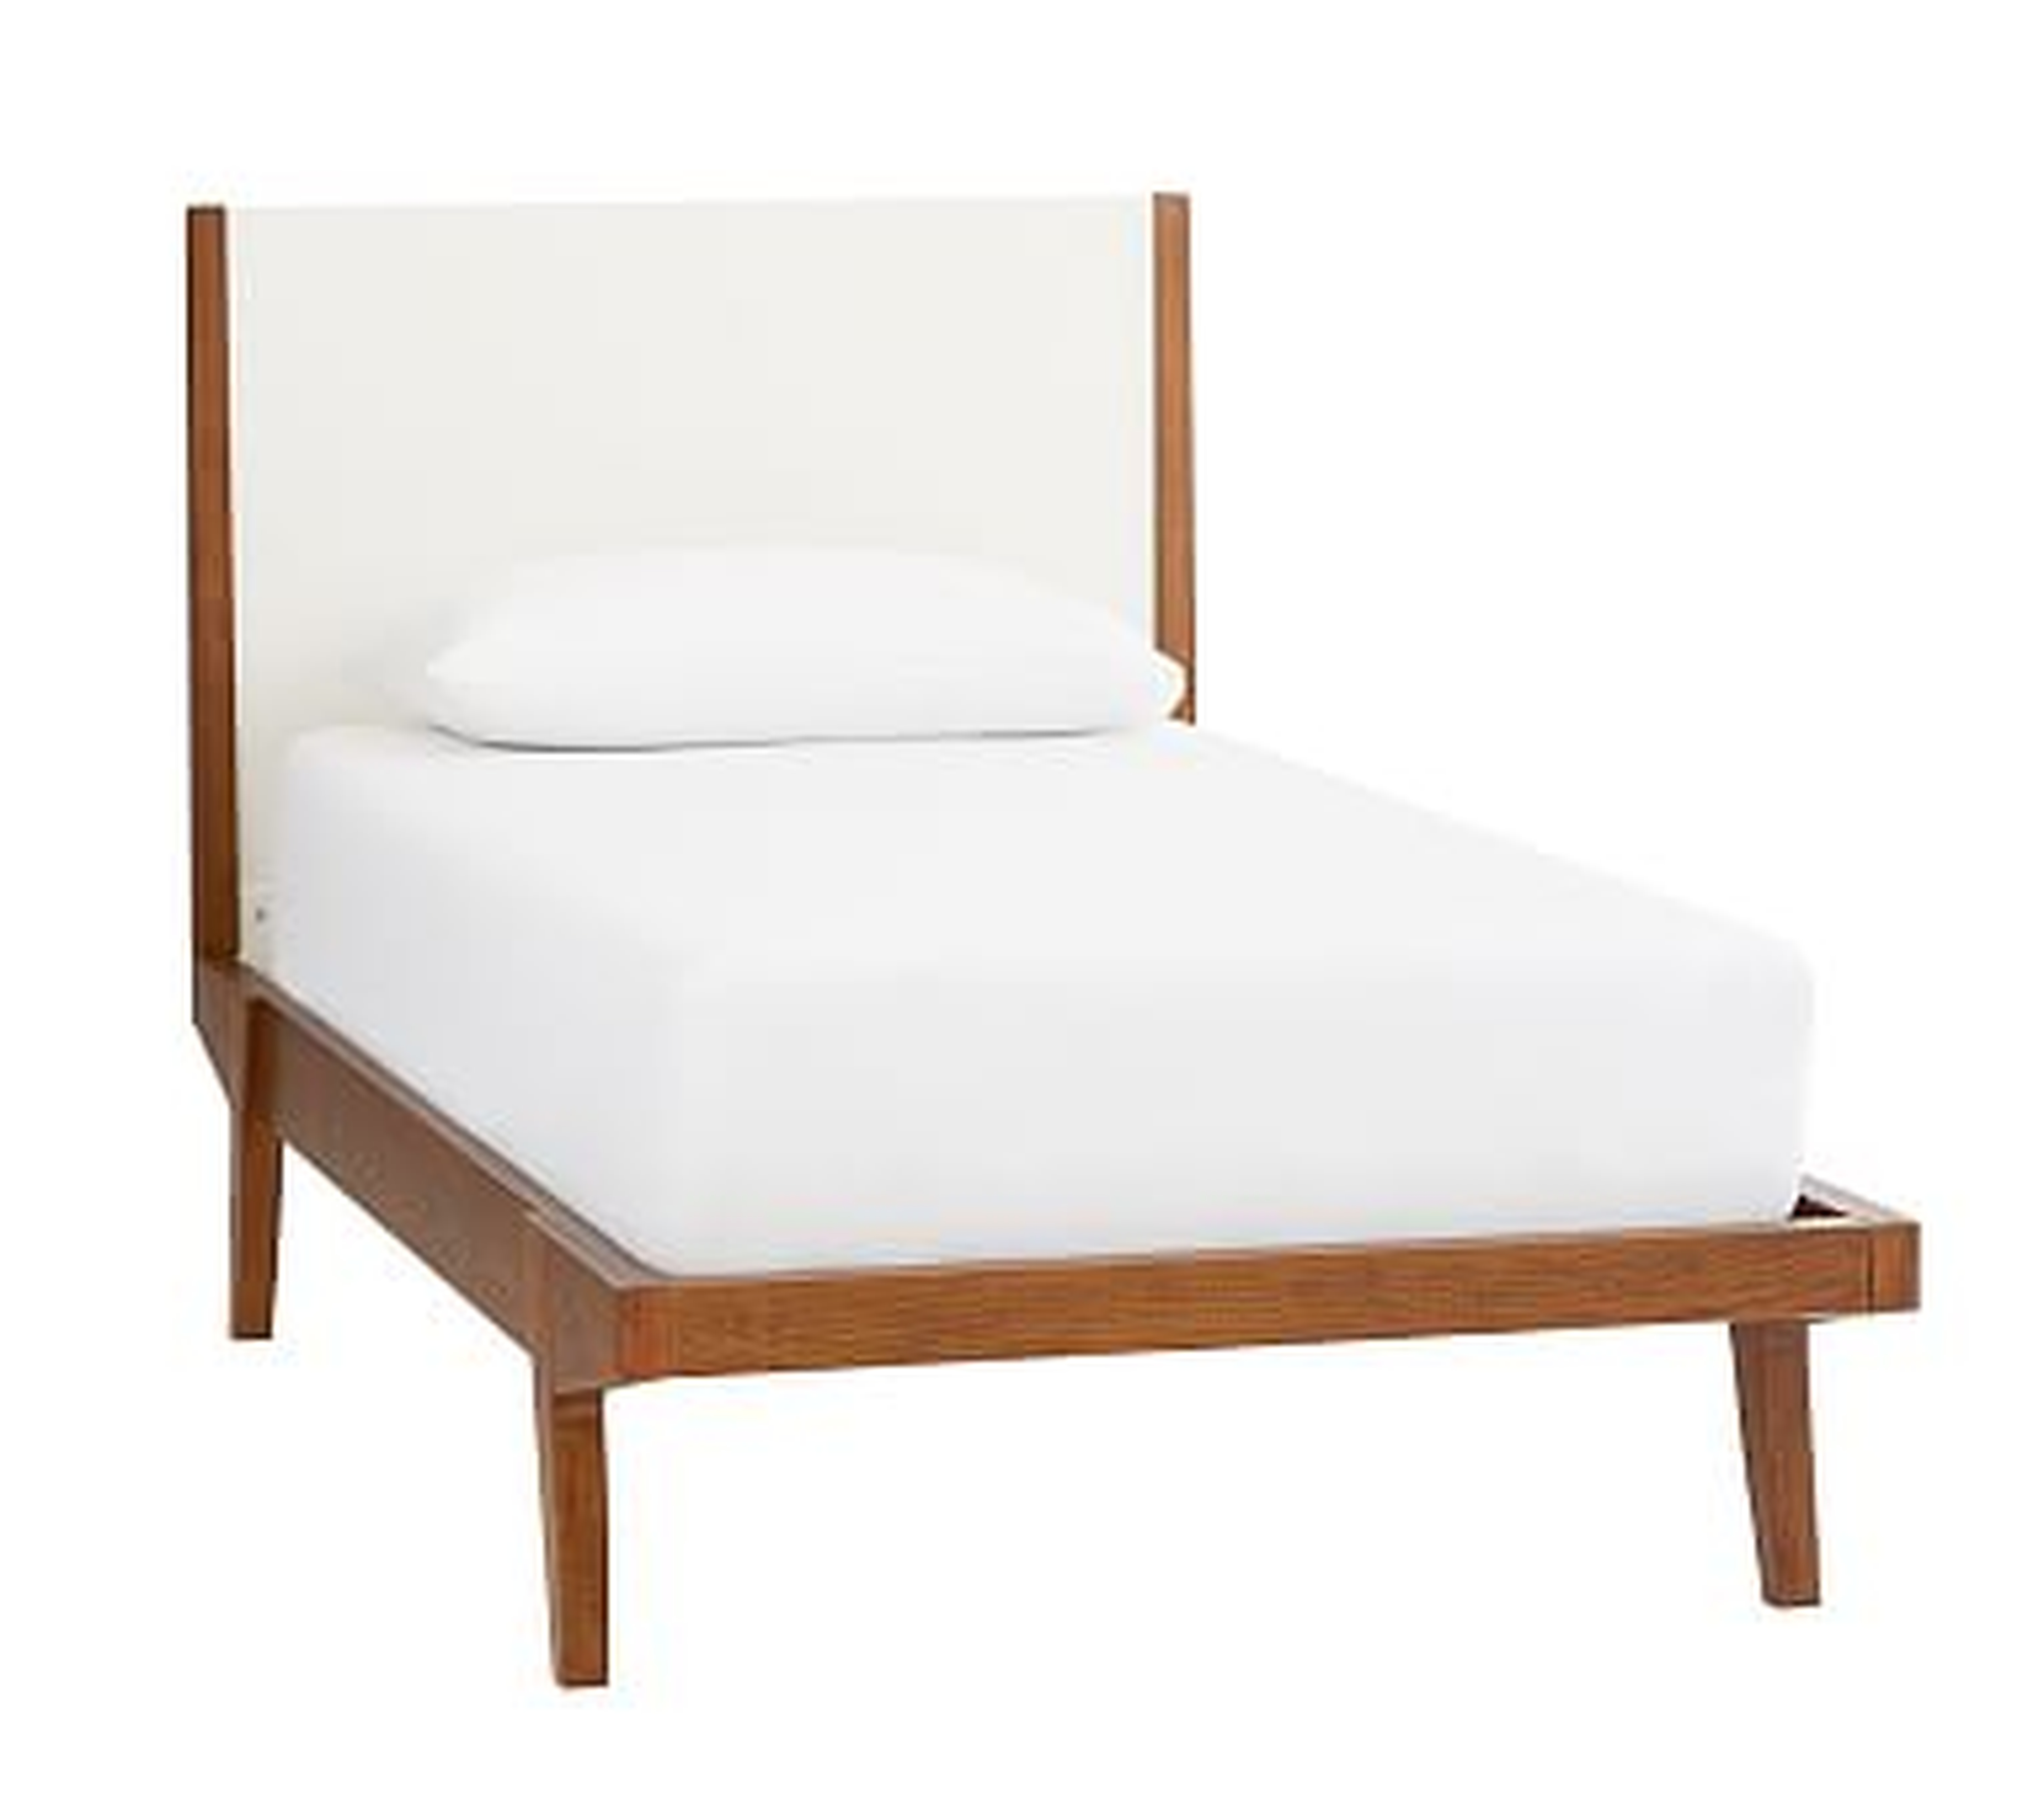 west elm x pbk Modern Lacquer Bed, Twin, Pecan/White, In-Home Delivery - Pottery Barn Kids